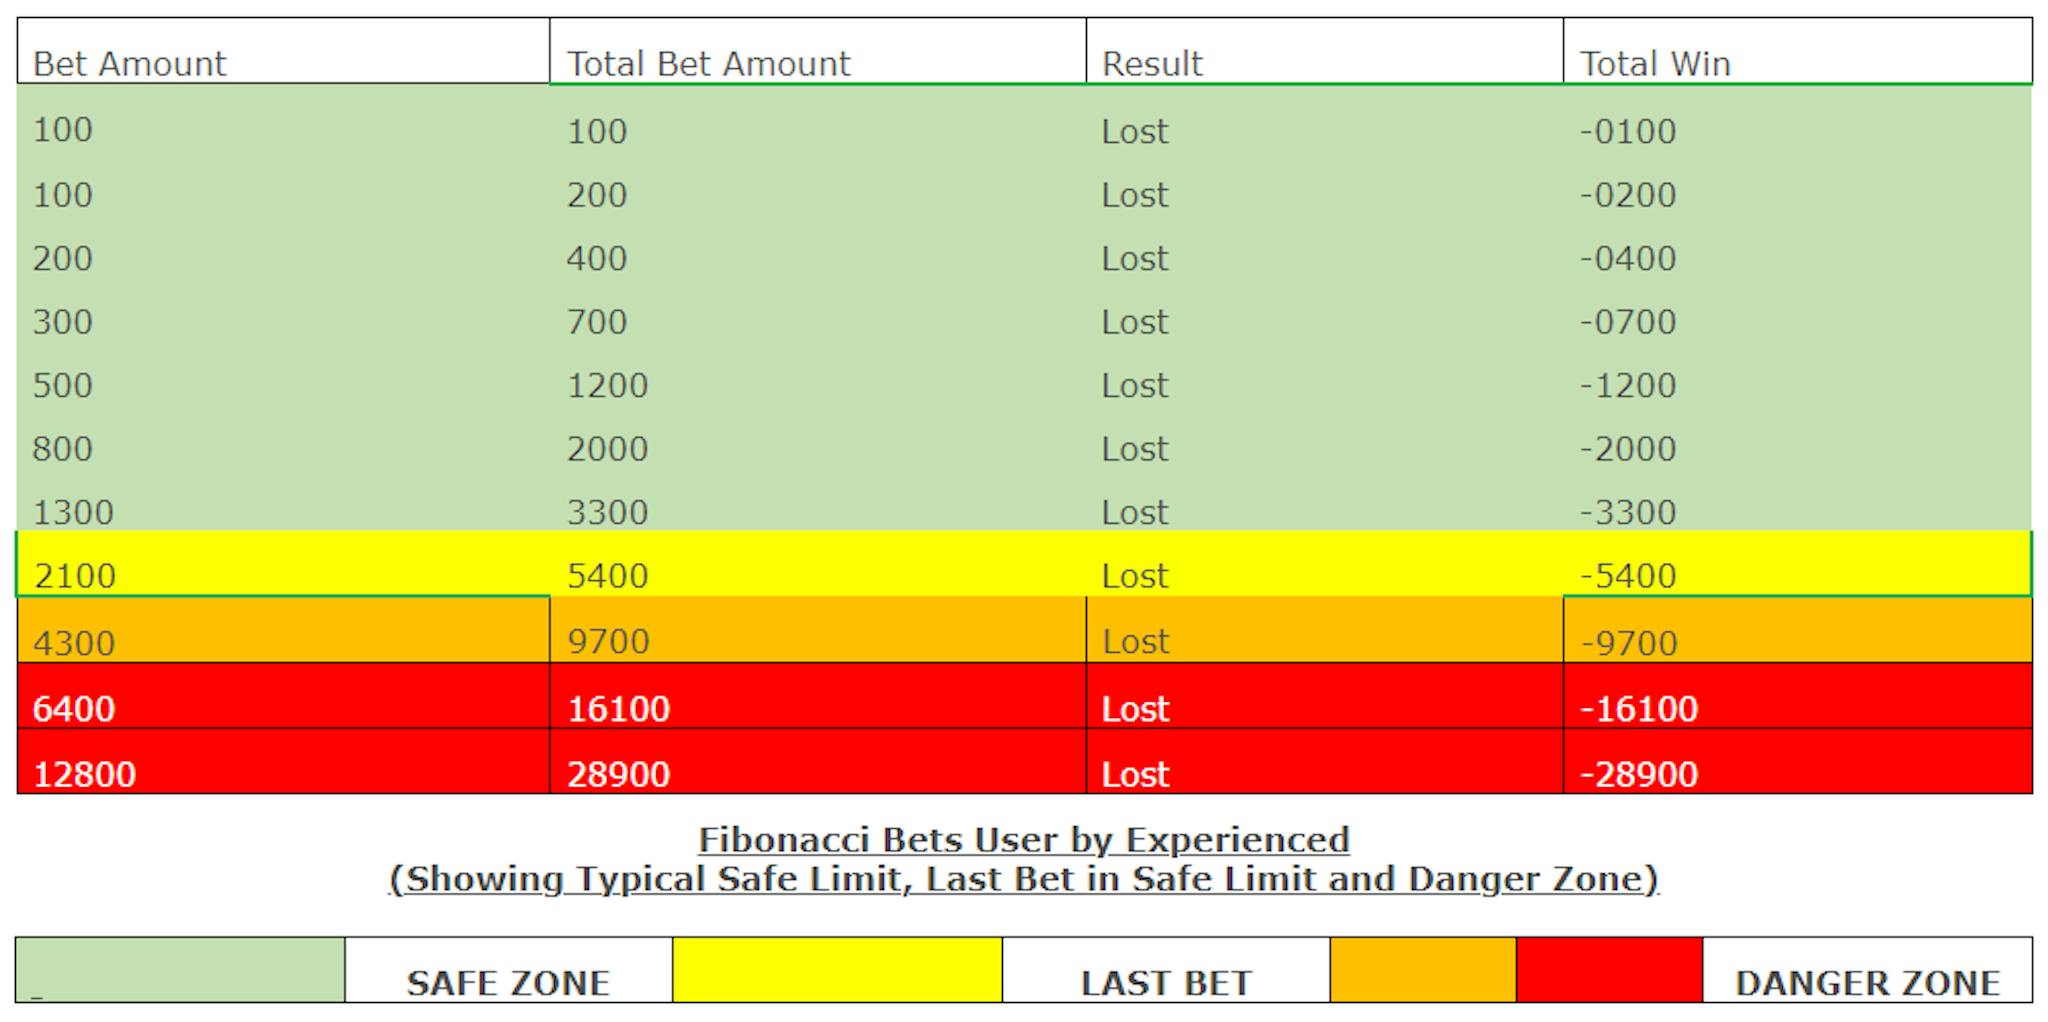 Fibonacci Bets User by Experienced(Showing Typical Safe Limit, Last Bet in Safe Limit and Danger Zone)